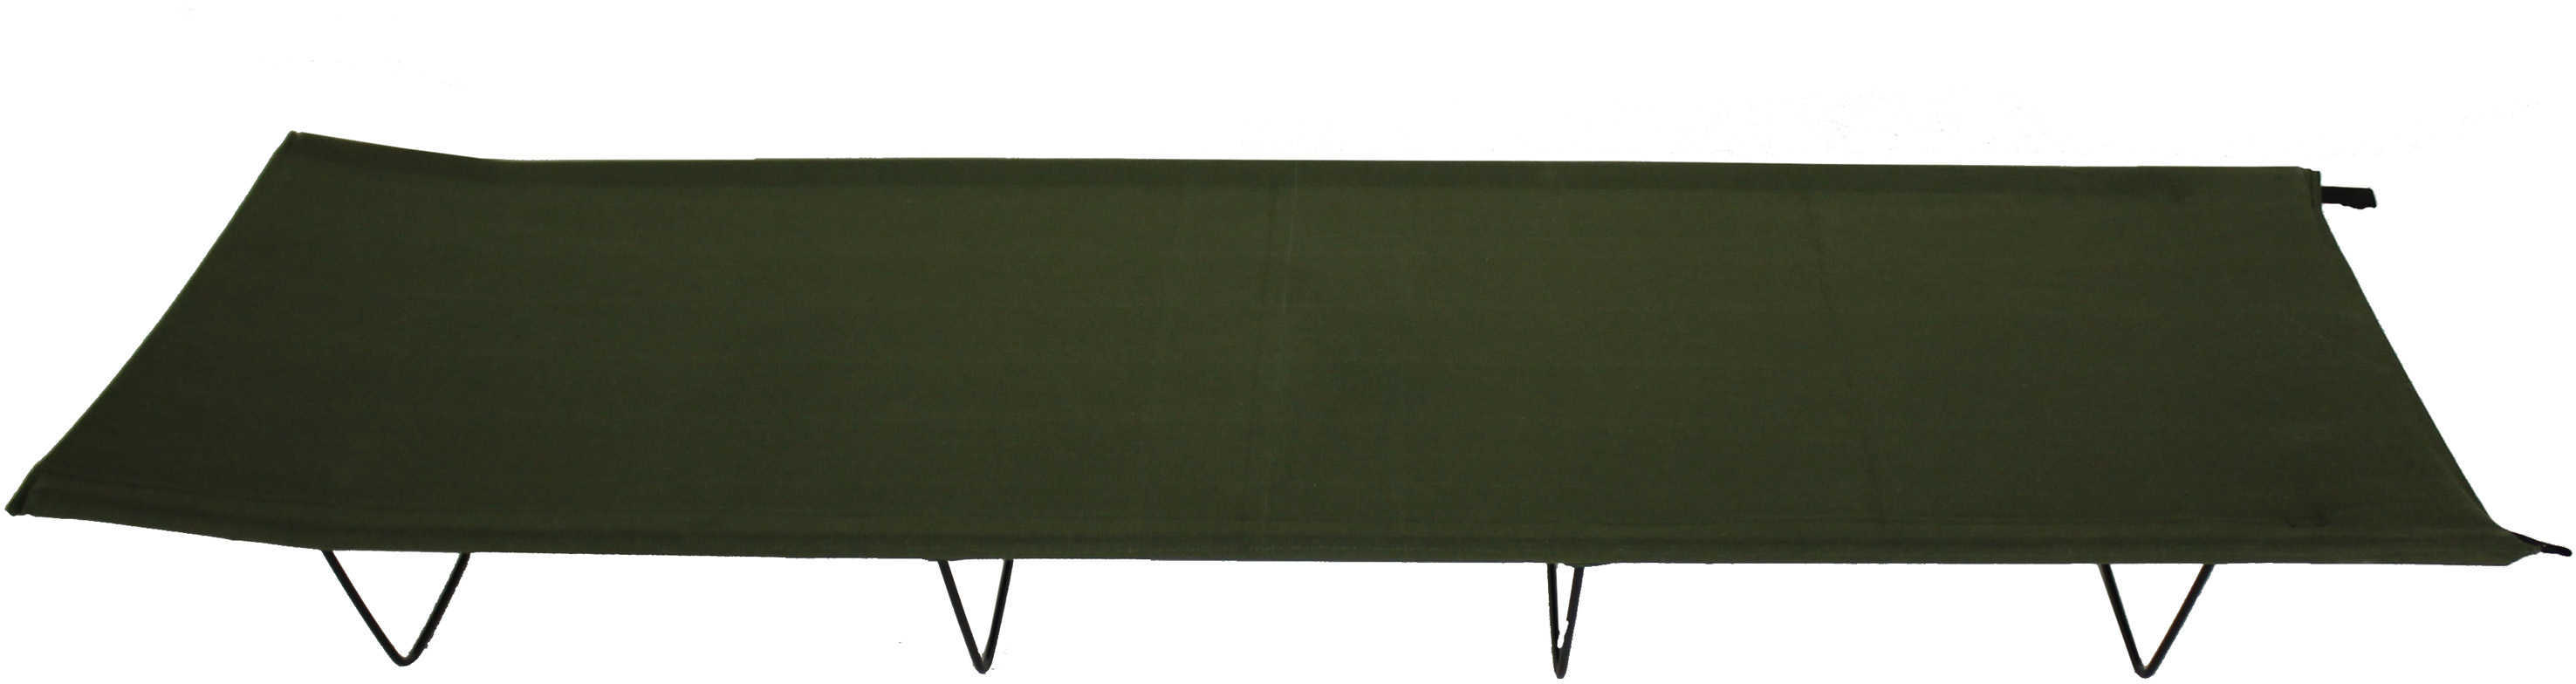 Tex Sport Cot - Collapsible - Steel